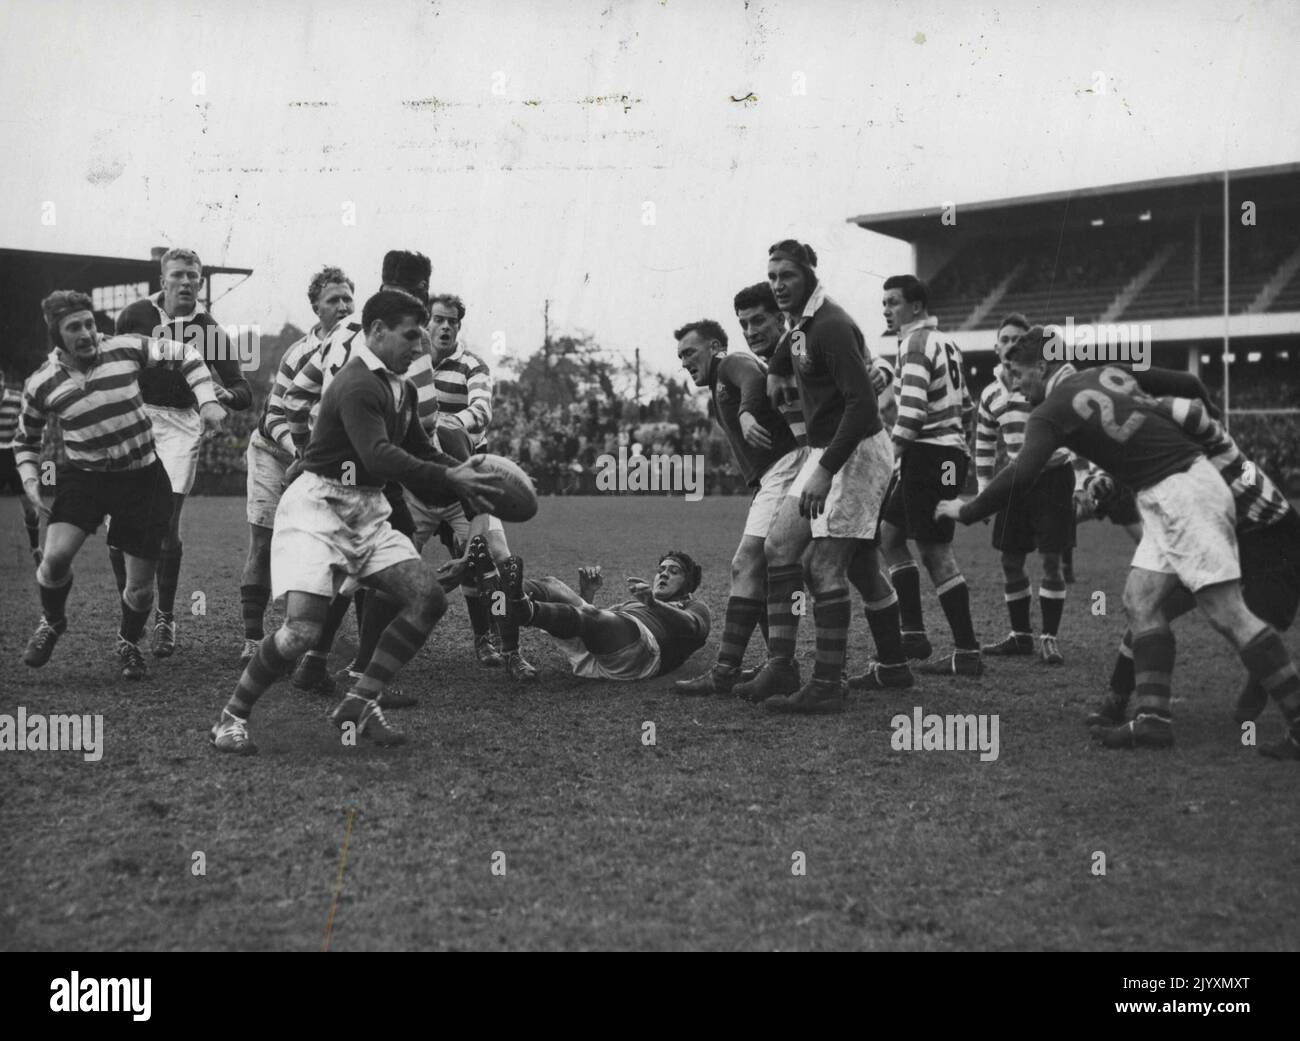 Australian Rugby Union player Johnny Rosier, about to clear with a kick from a scrum during the match against Western Province, at Capetown. The Australians won, Rosier scoring two tries. August 8, 1953. Stock Photo